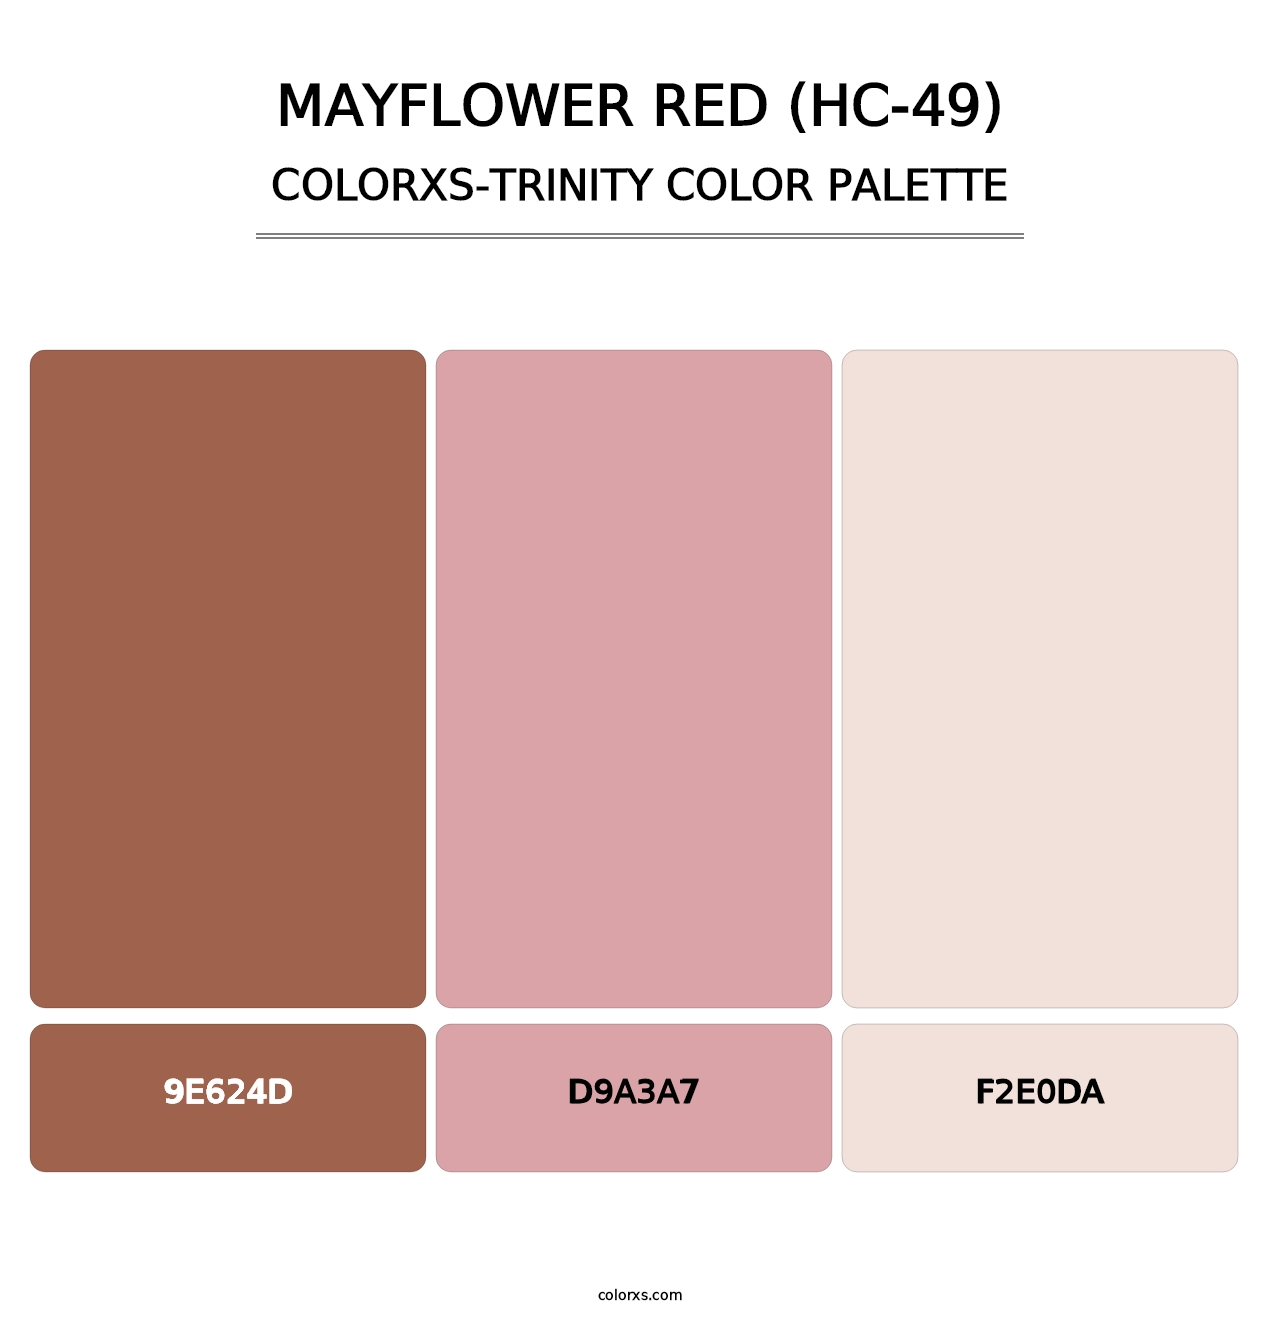 Mayflower Red (HC-49) - Colorxs Trinity Palette